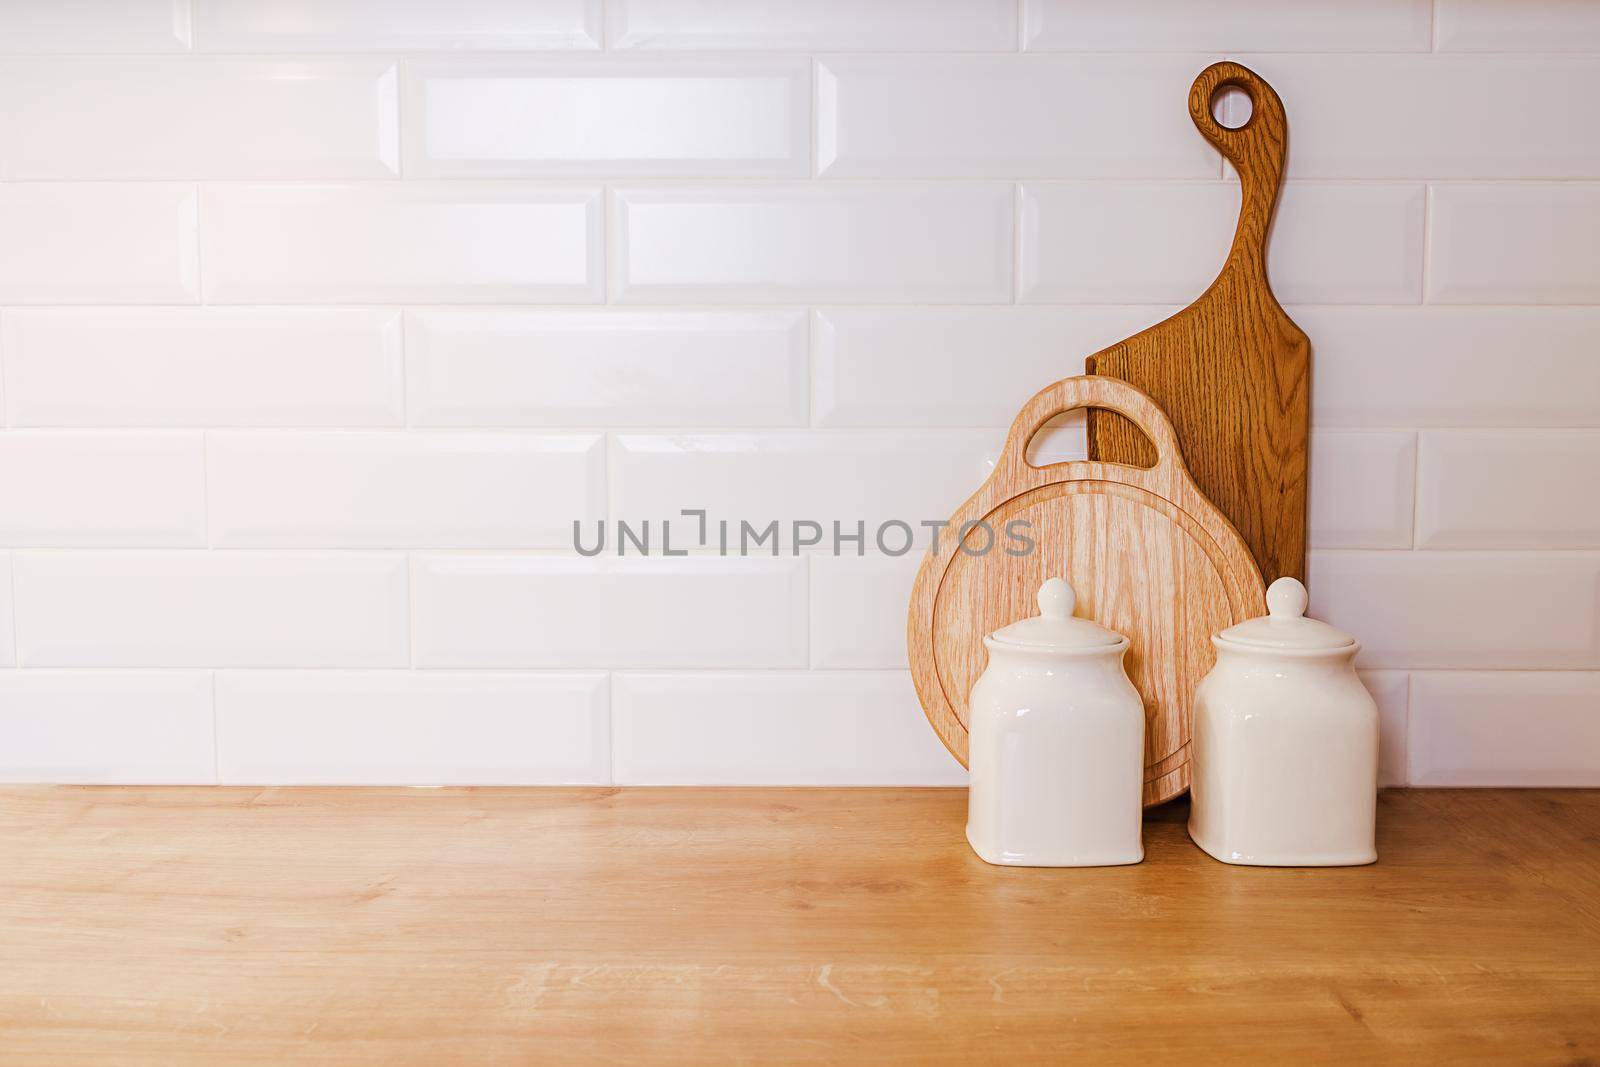 mockup, against a white wall, kitchen utensils. Wooden cutting boards for vegetables and ceramic dishes. The concept of home cooking recipes from natural products, copy paste your design